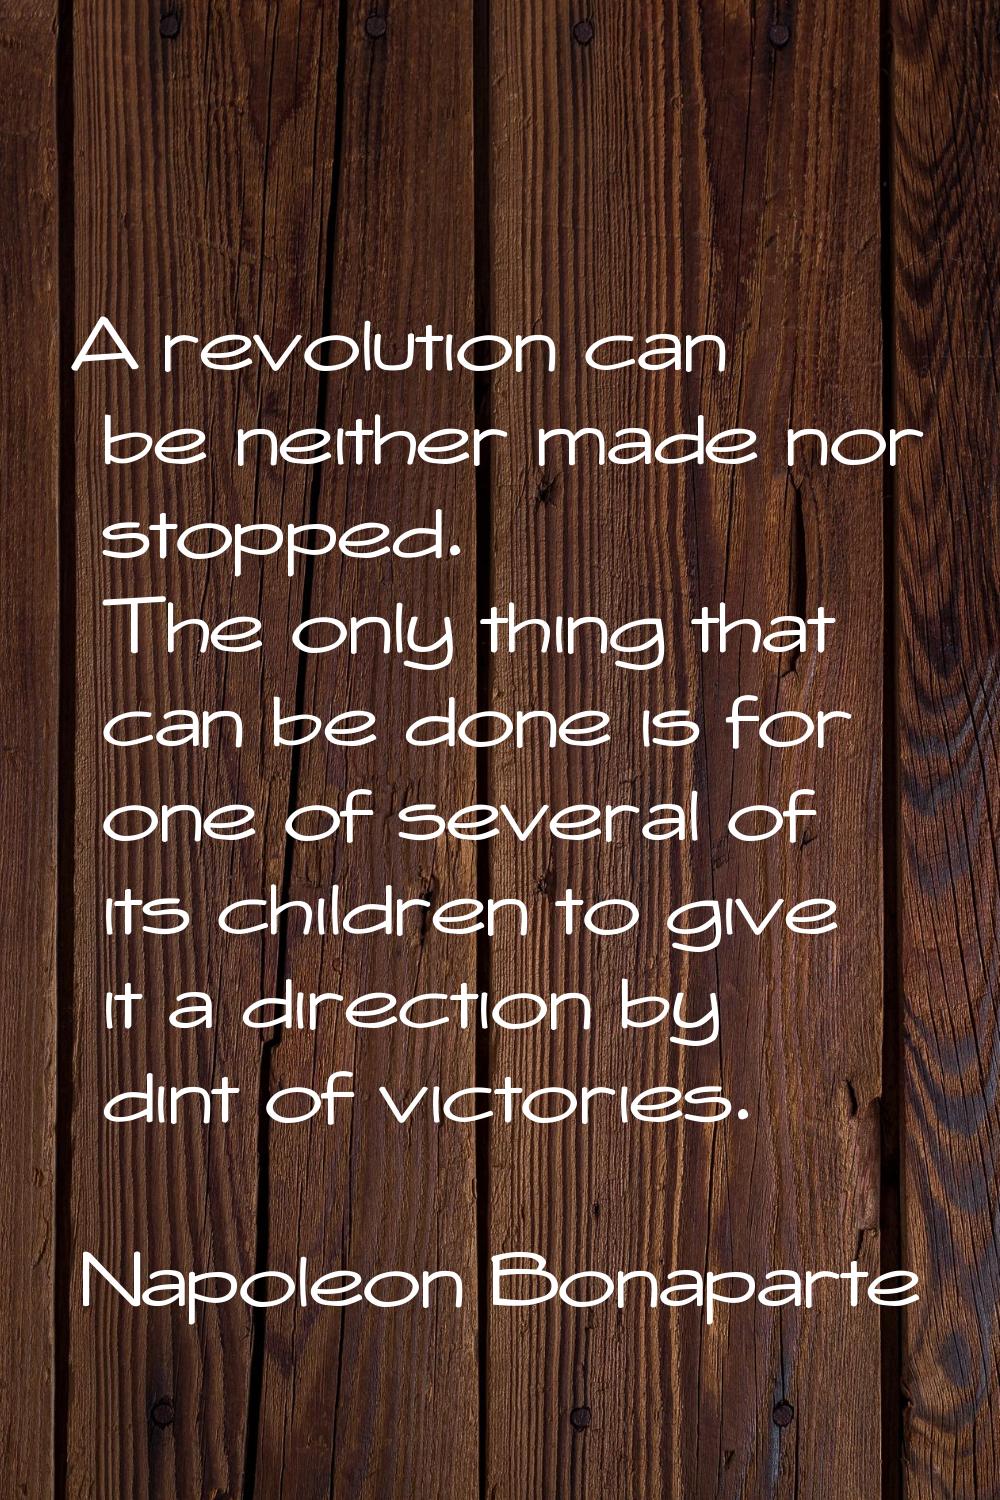 A revolution can be neither made nor stopped. The only thing that can be done is for one of several